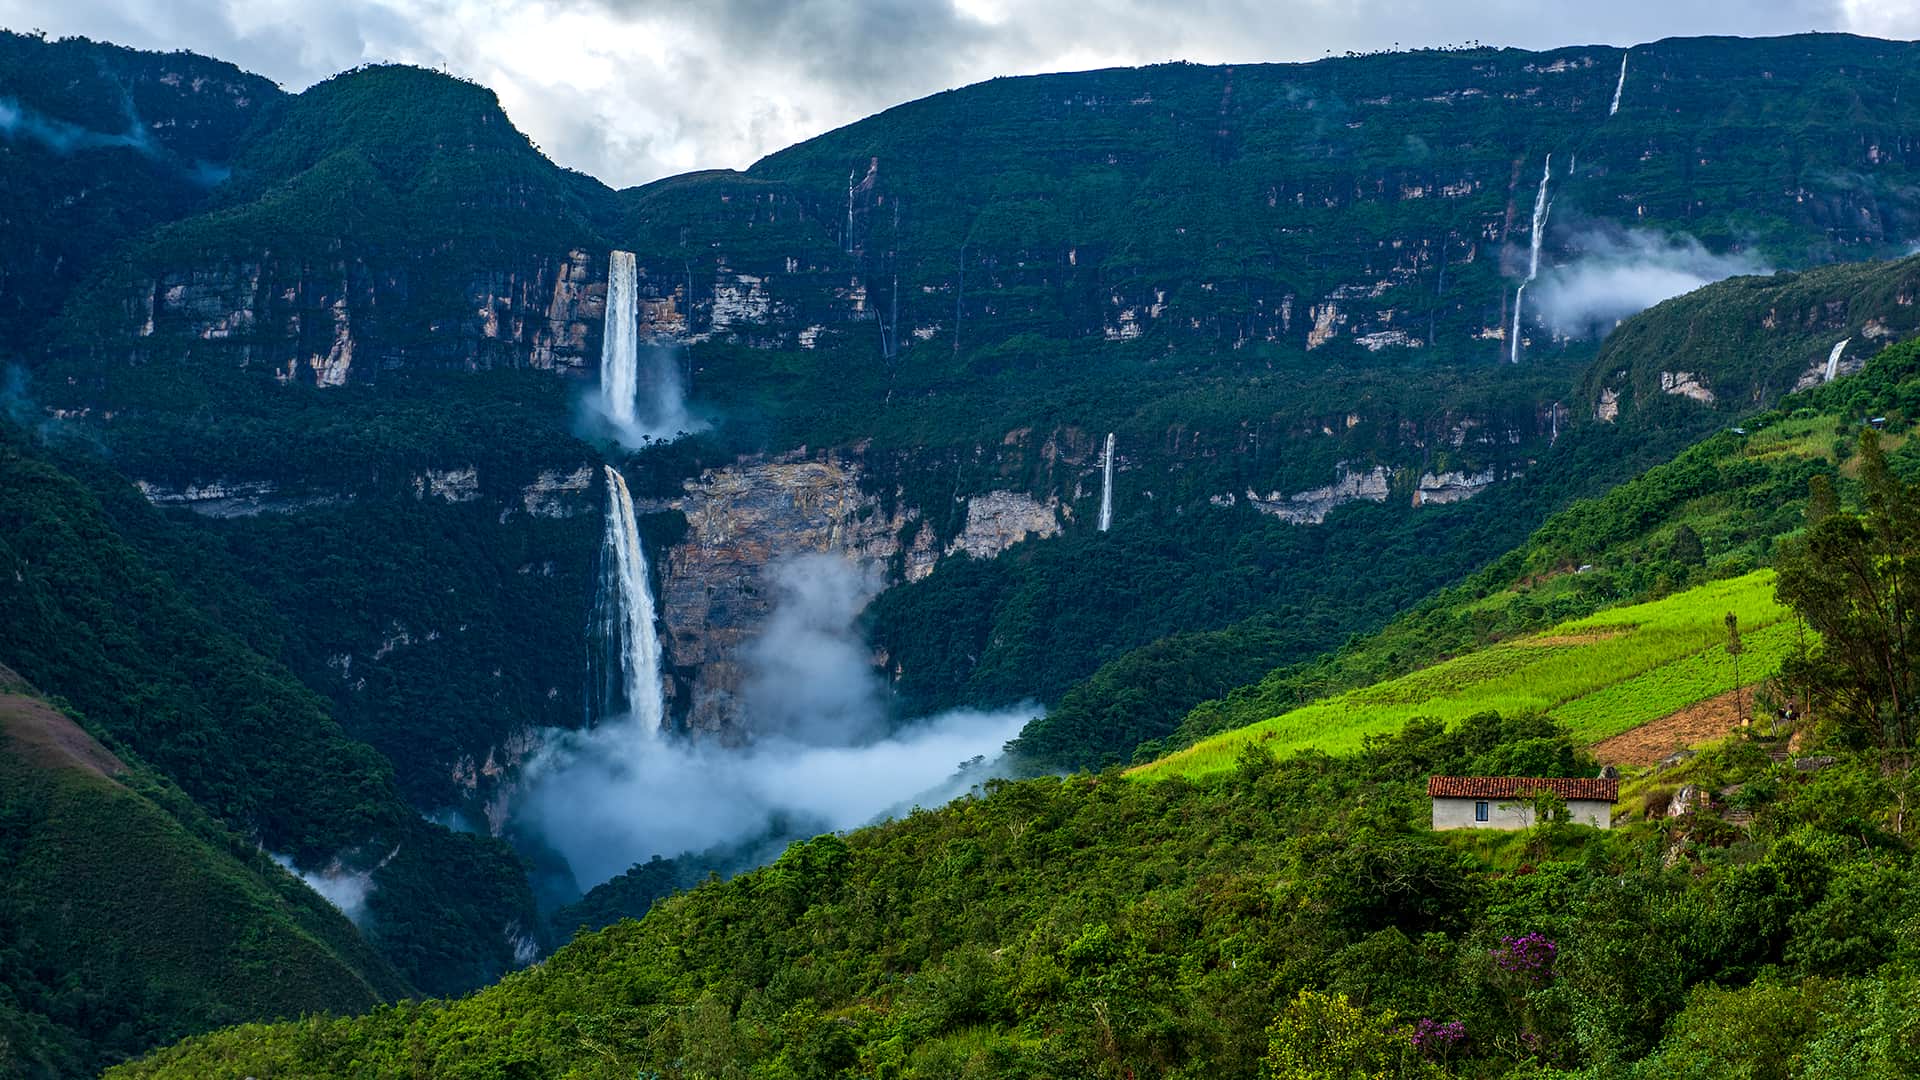 11Panoramic view of Gocta waterfall of 770 meters high in a contrasting dark blue background of the mountains with the bright green of the forest | Responsible Travel Peru